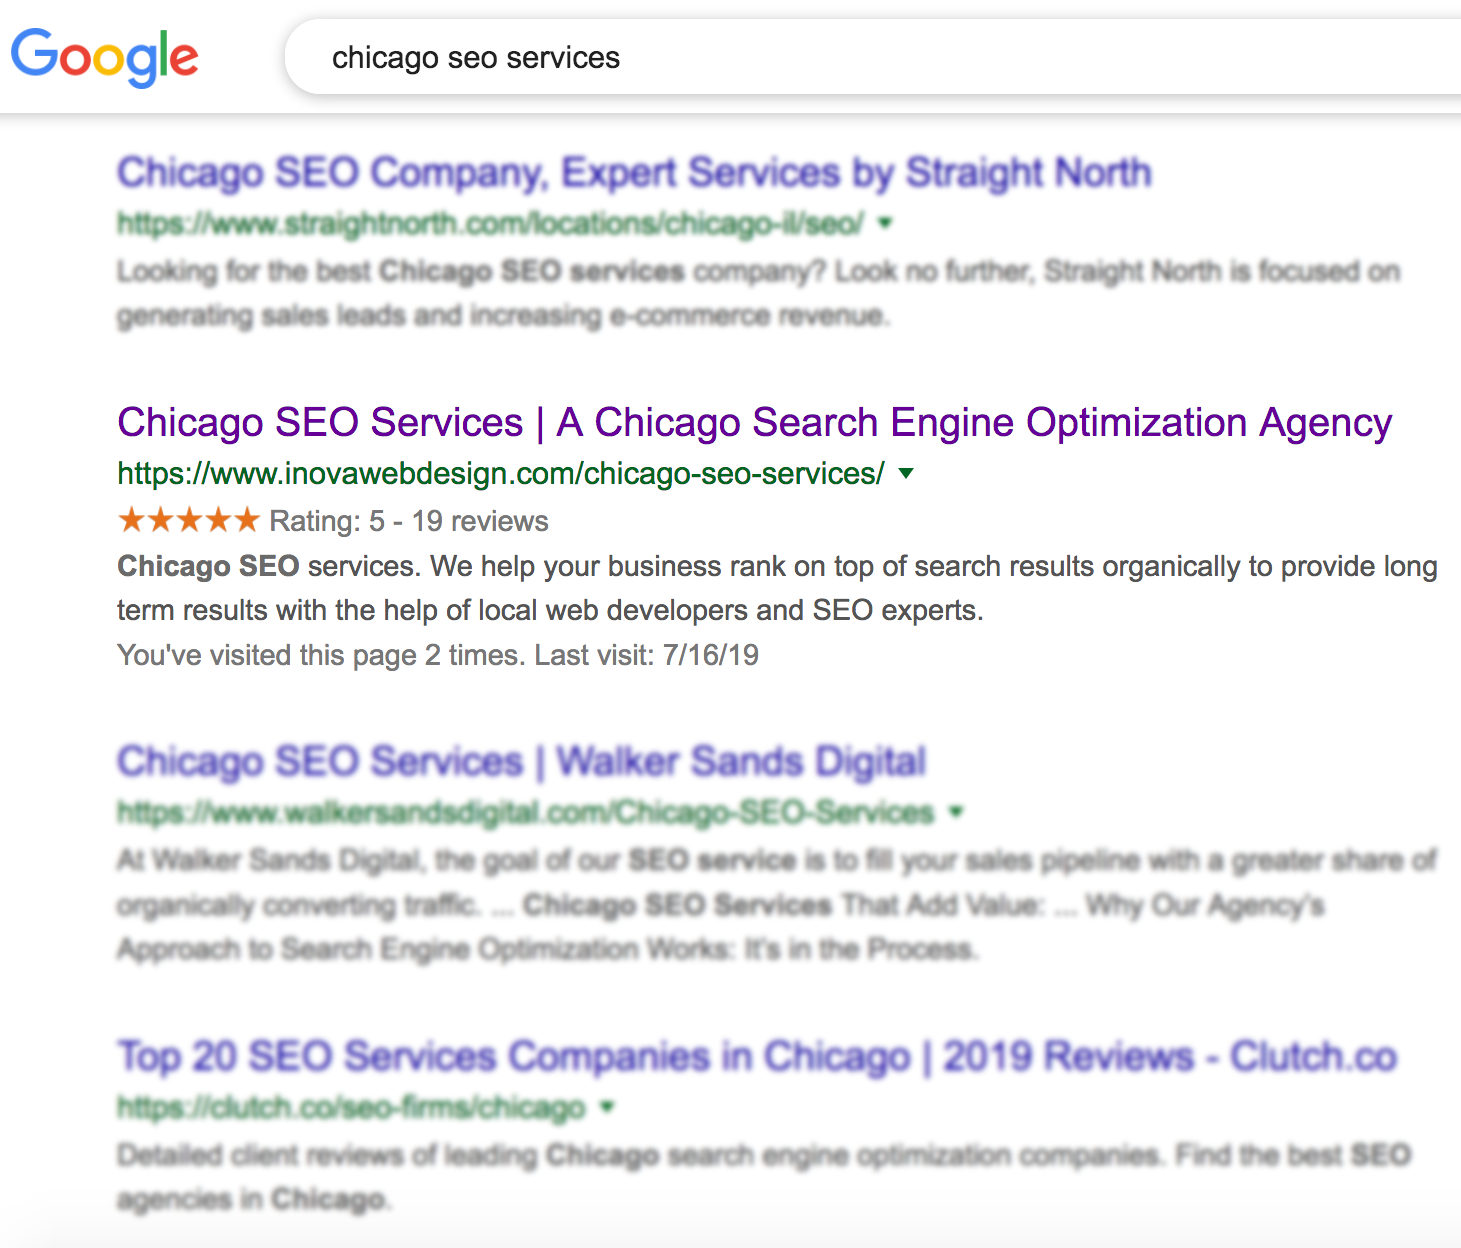 Google search results for SEO services